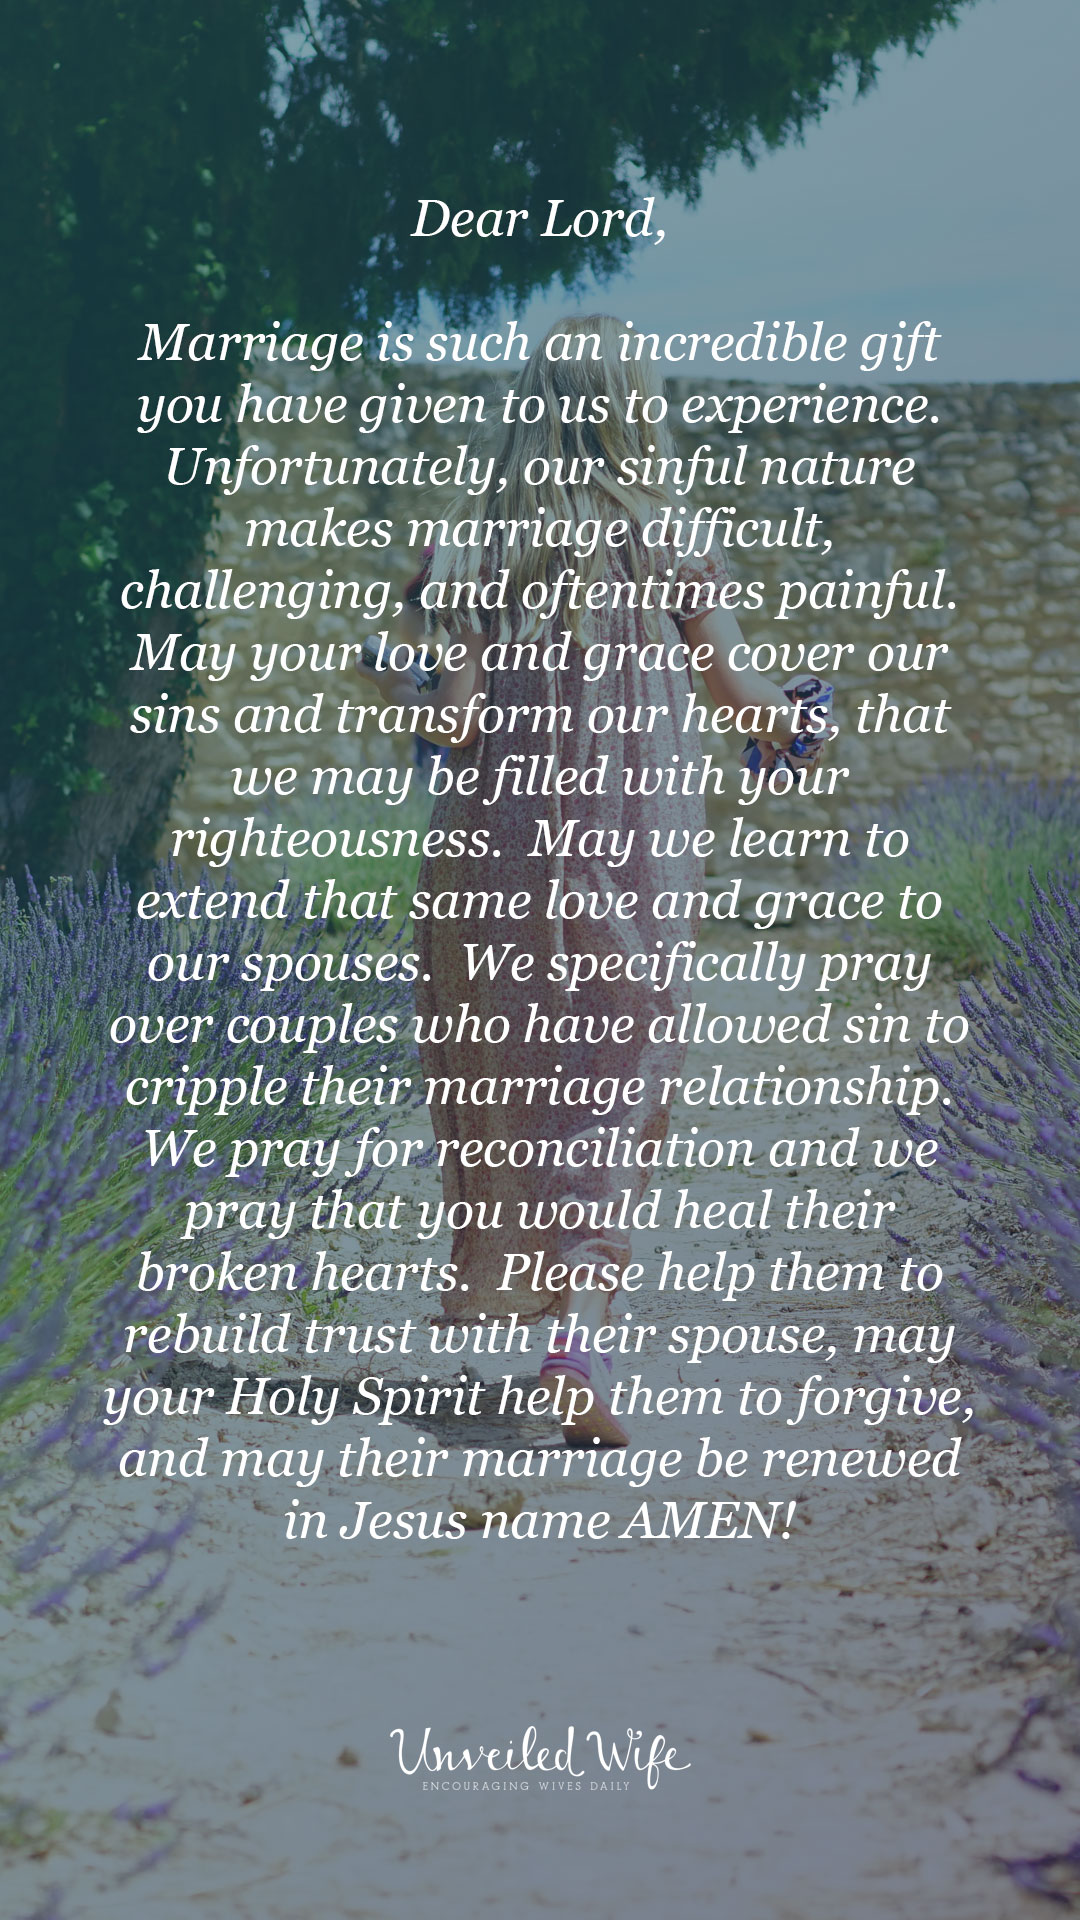 Prayer Of The Day : Rebuilding Trust In Marriage